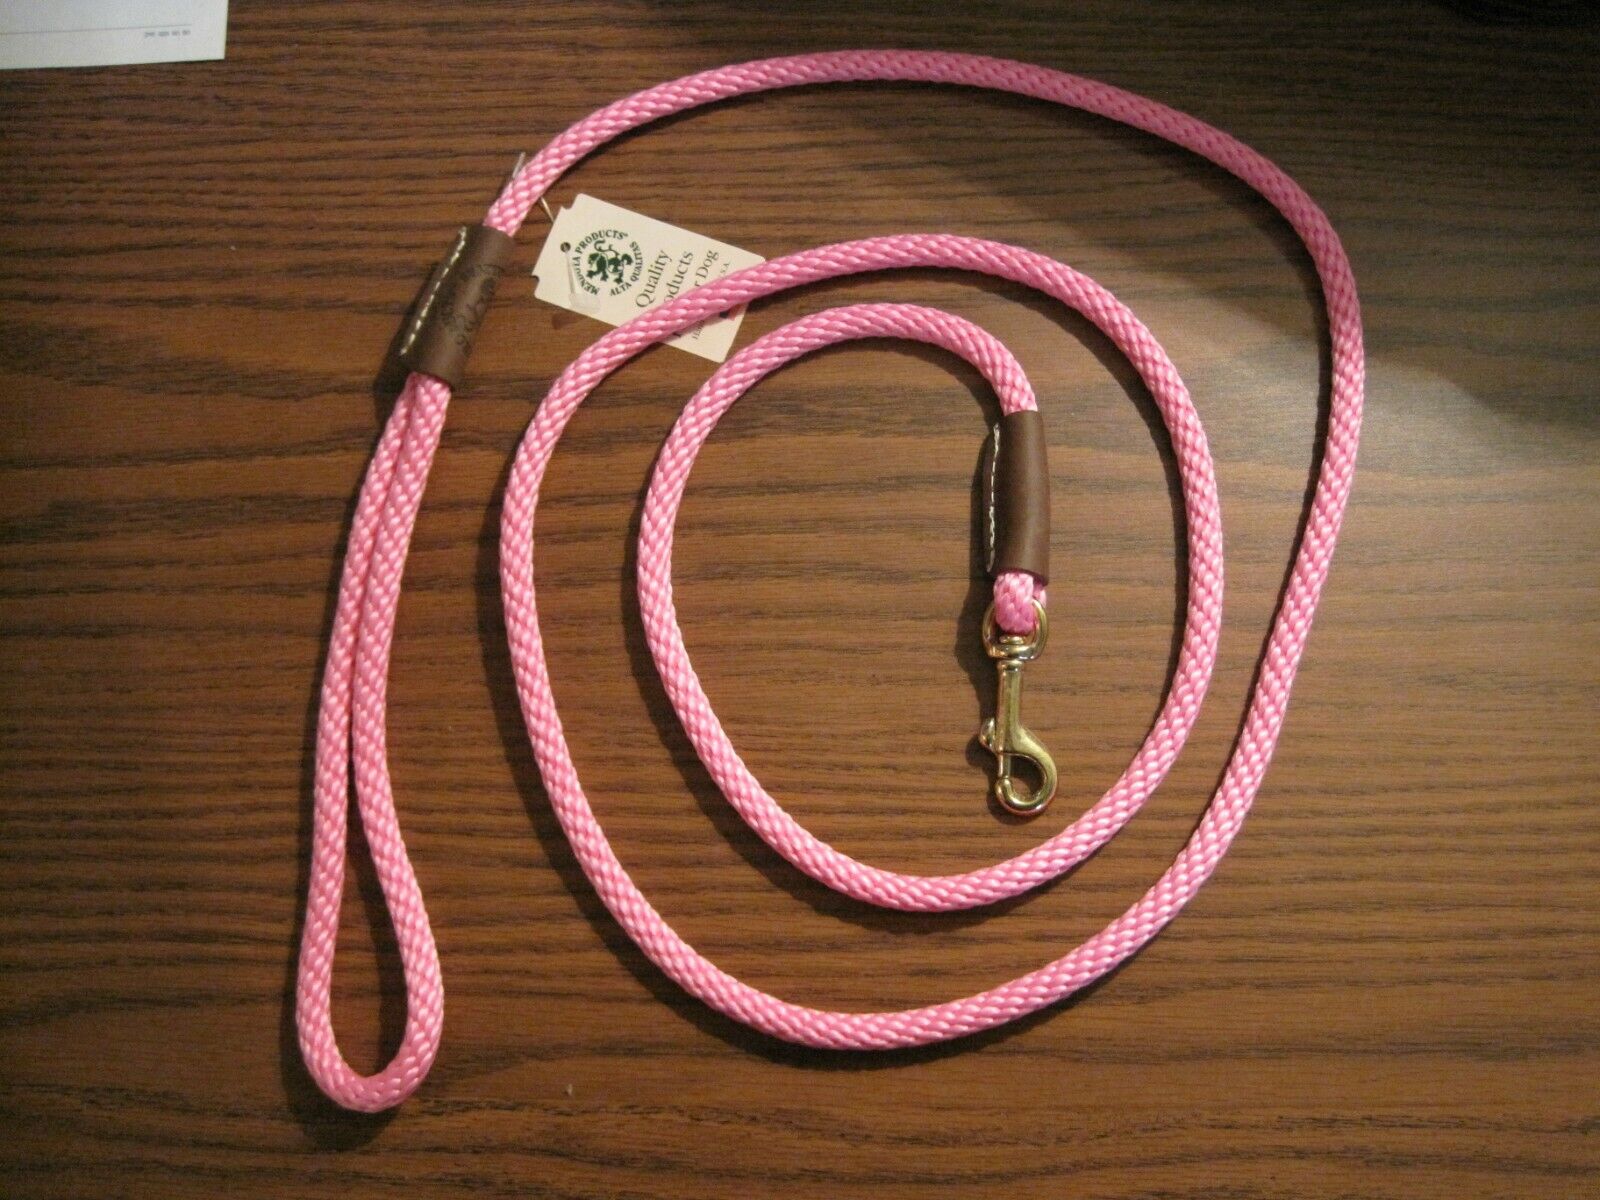 Mendota Braided Dog Leash Lead Sm-Med <50lbs 3/8" x 6' Made in USA Hot Pink